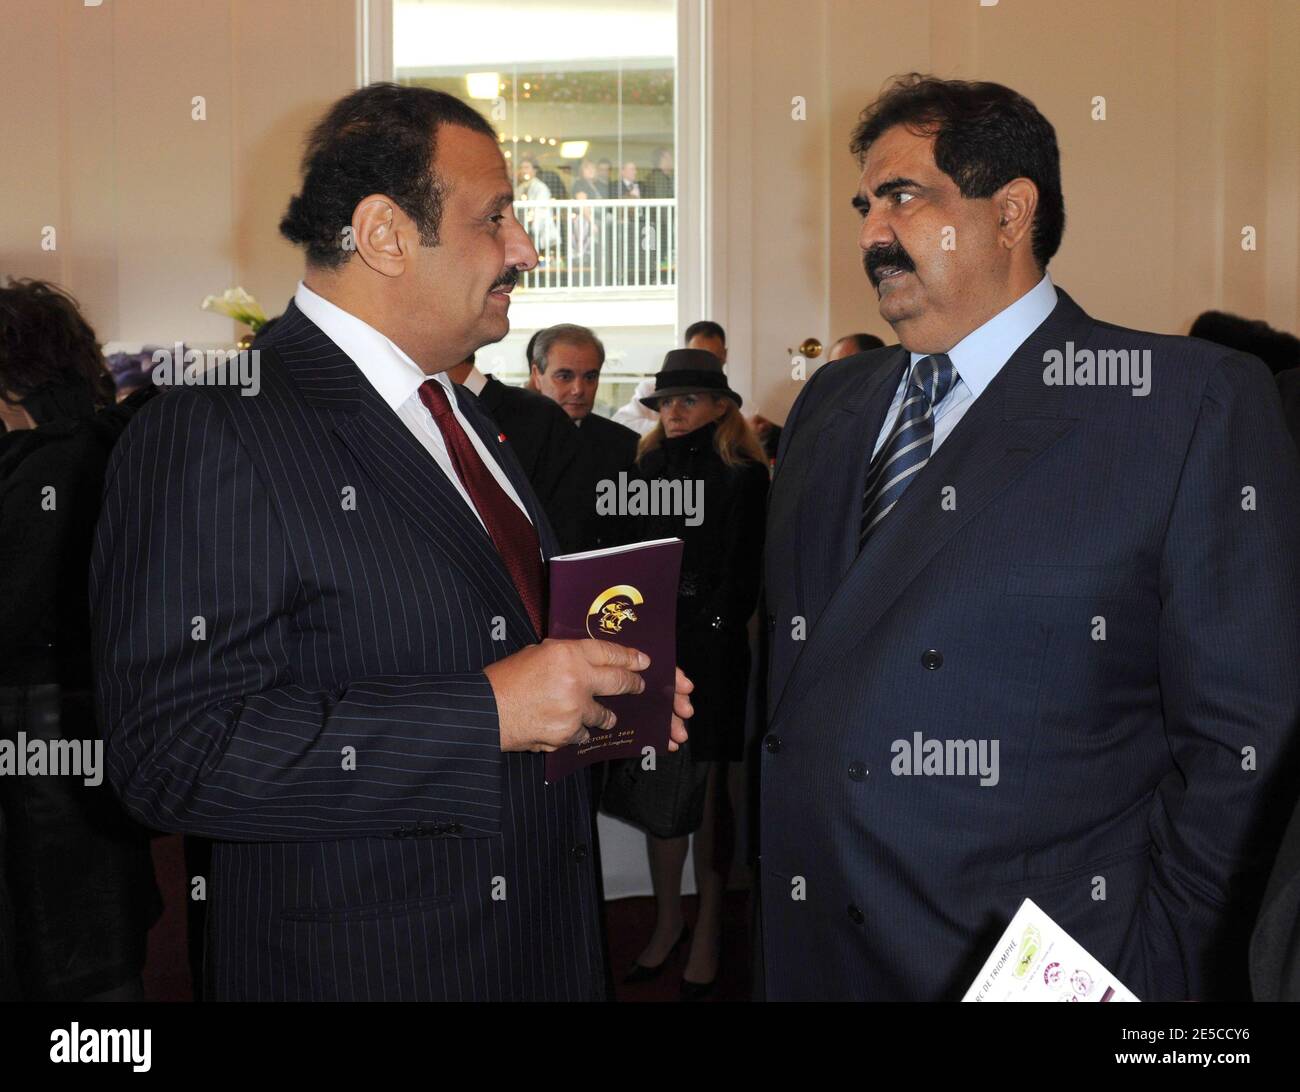 Qatar's Emir Sheikh Hamad Bin Khalifa Al Thani (R) is seen next to Saudi Vice Minister of Defence Prince Khaled Bin Sultan Al Saud, at the 87th Arc de Triomphe horserace, one of the world's richest races, at Longchamp Racecourse, near Paris, France, on October 5, 2008. The race, that was sponsored by Qatar for the first time, was won by Aga Khan's horse Zarkava. Photo by Ammar Abd Rabbo/ABACAPRESS.COM Stock Photo